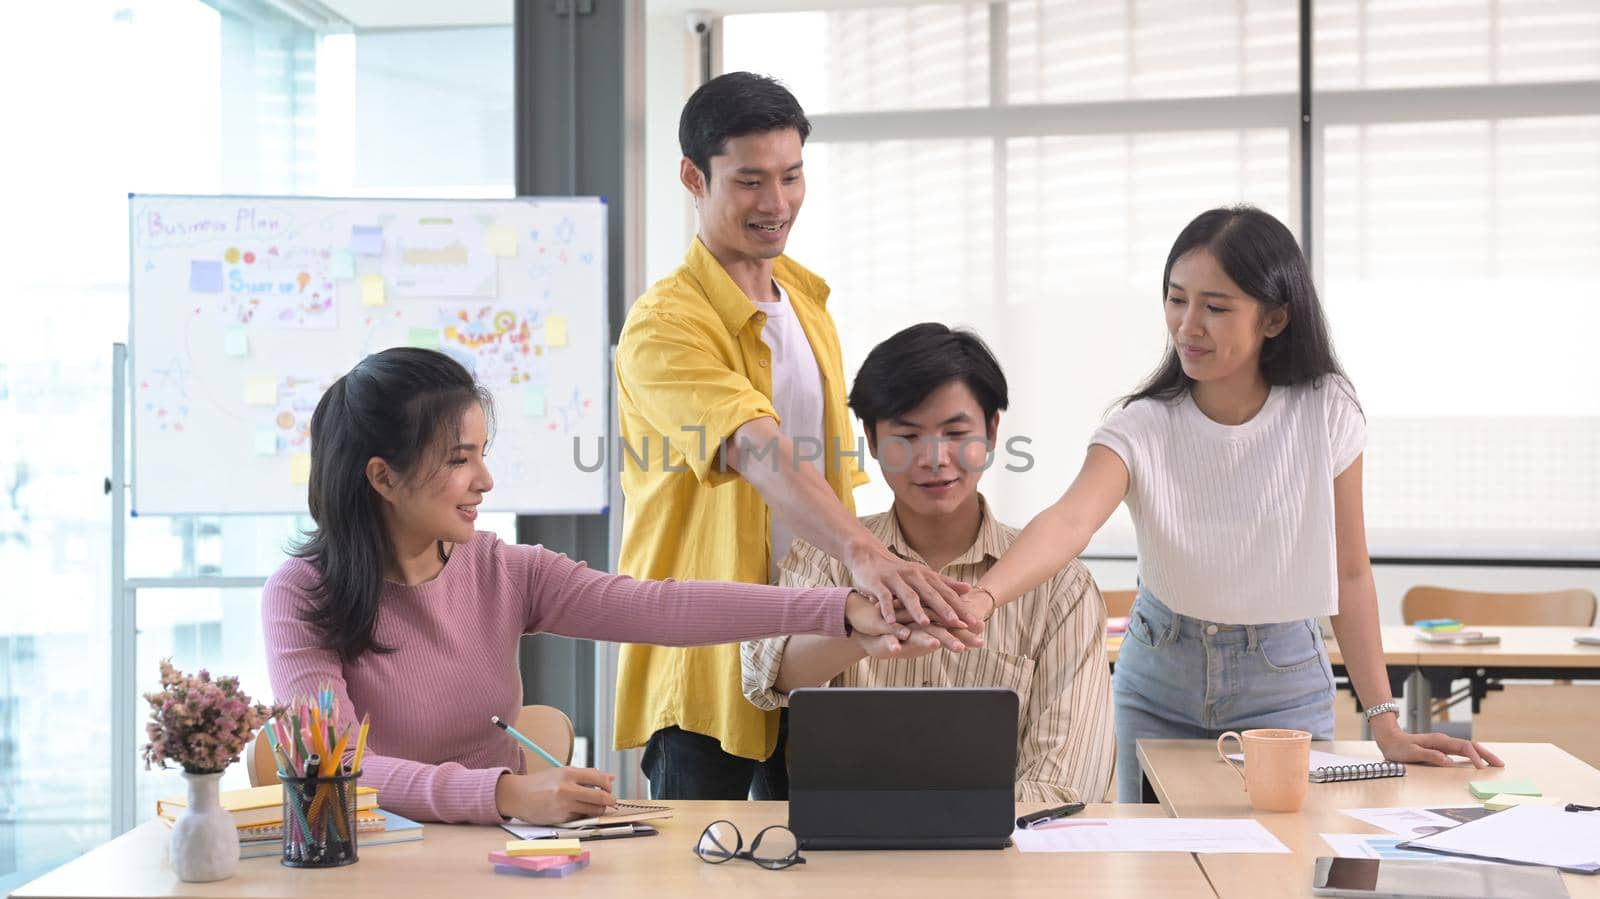 Startup business people are stacking hands over table, showing group unity, celebrating successful teamwork or achievement at meeting. by prathanchorruangsak